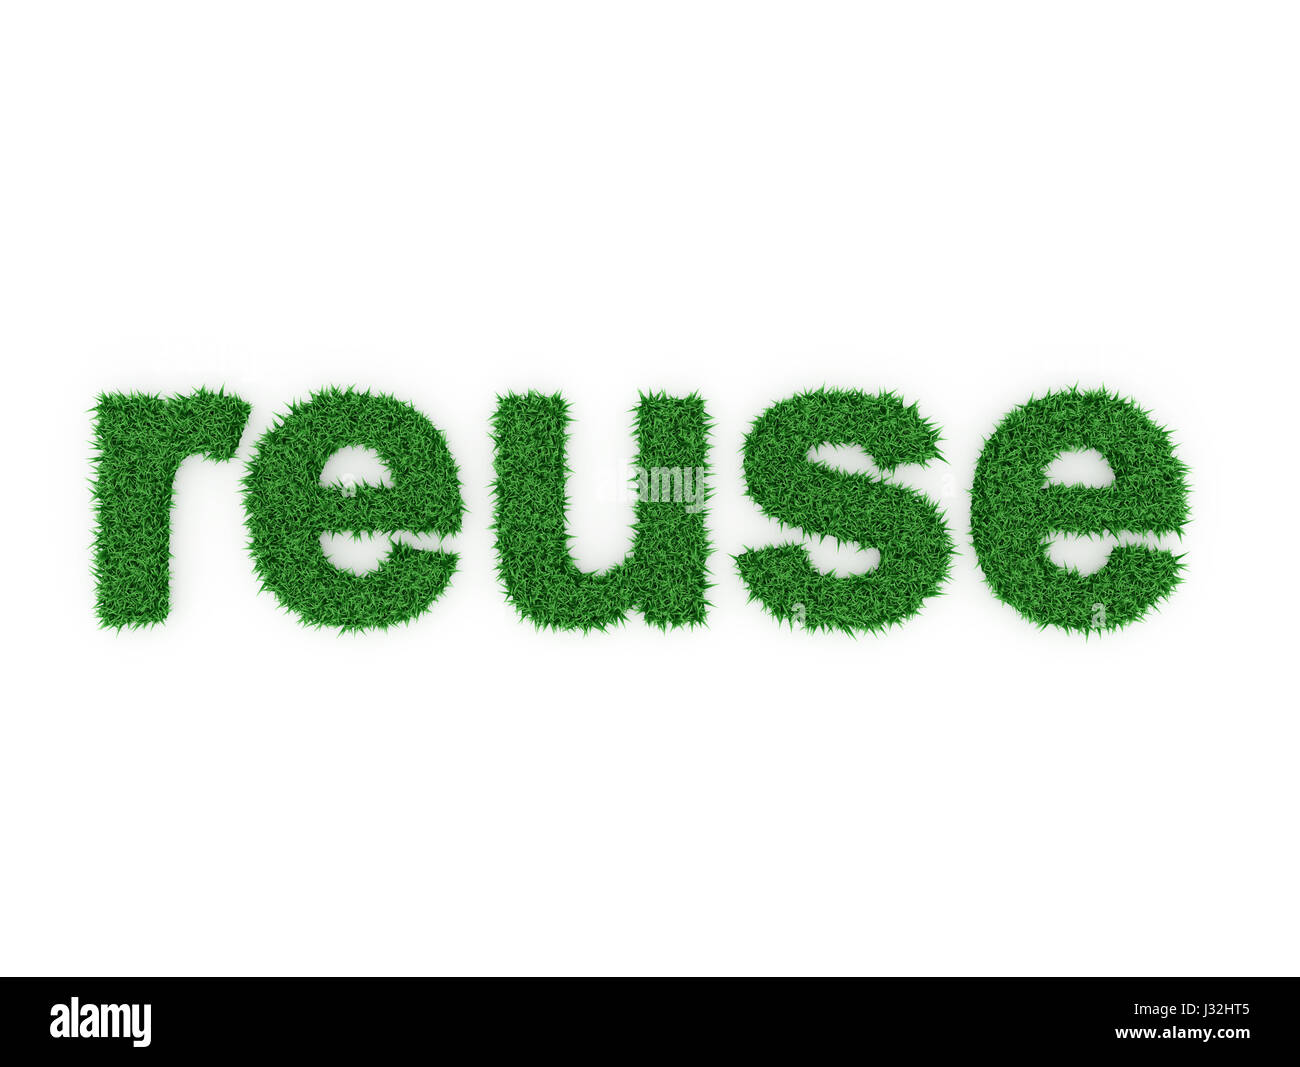 Reuse - 3D Rendered Images Stock Photo